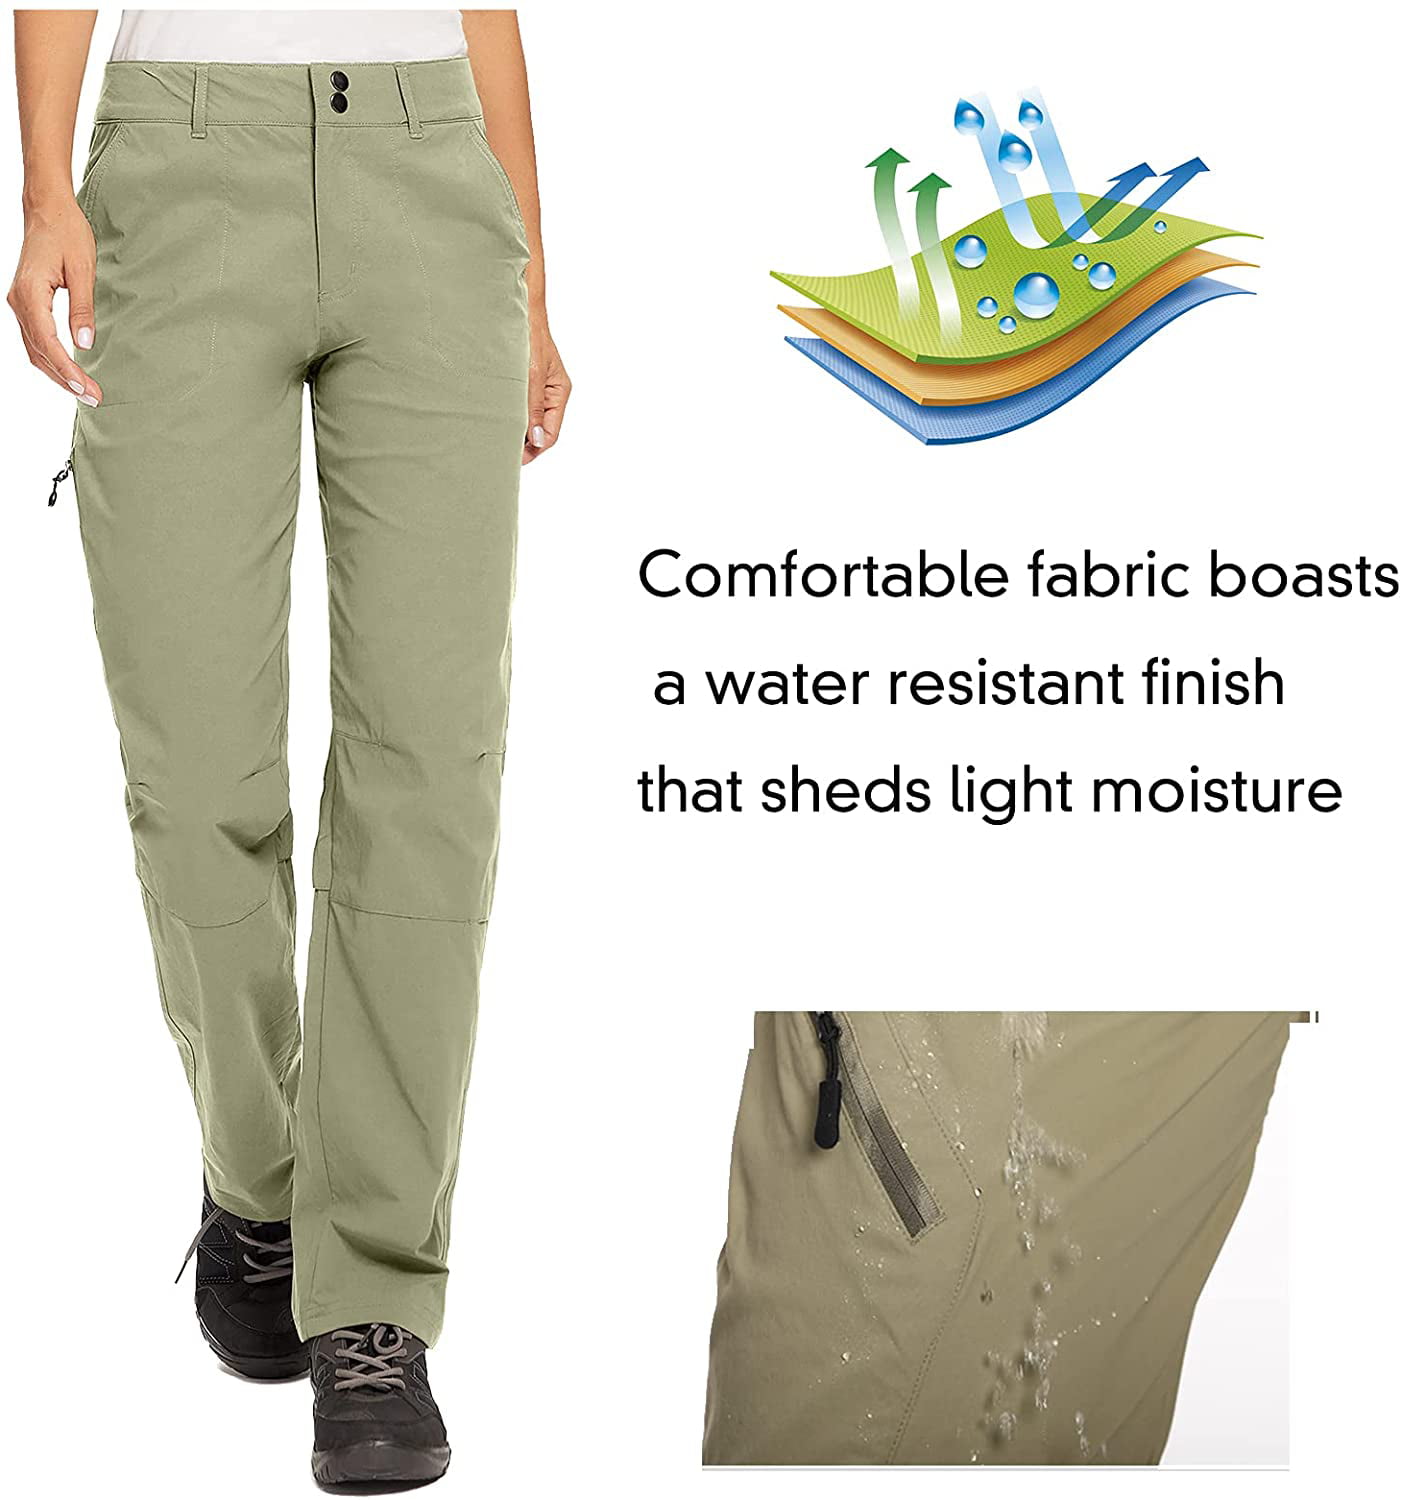 HTB Women's Quick Dry Stretch Hiking Pants with Zipper Pockets Water Resistant UPF 50 Outdoor Sports Pants 